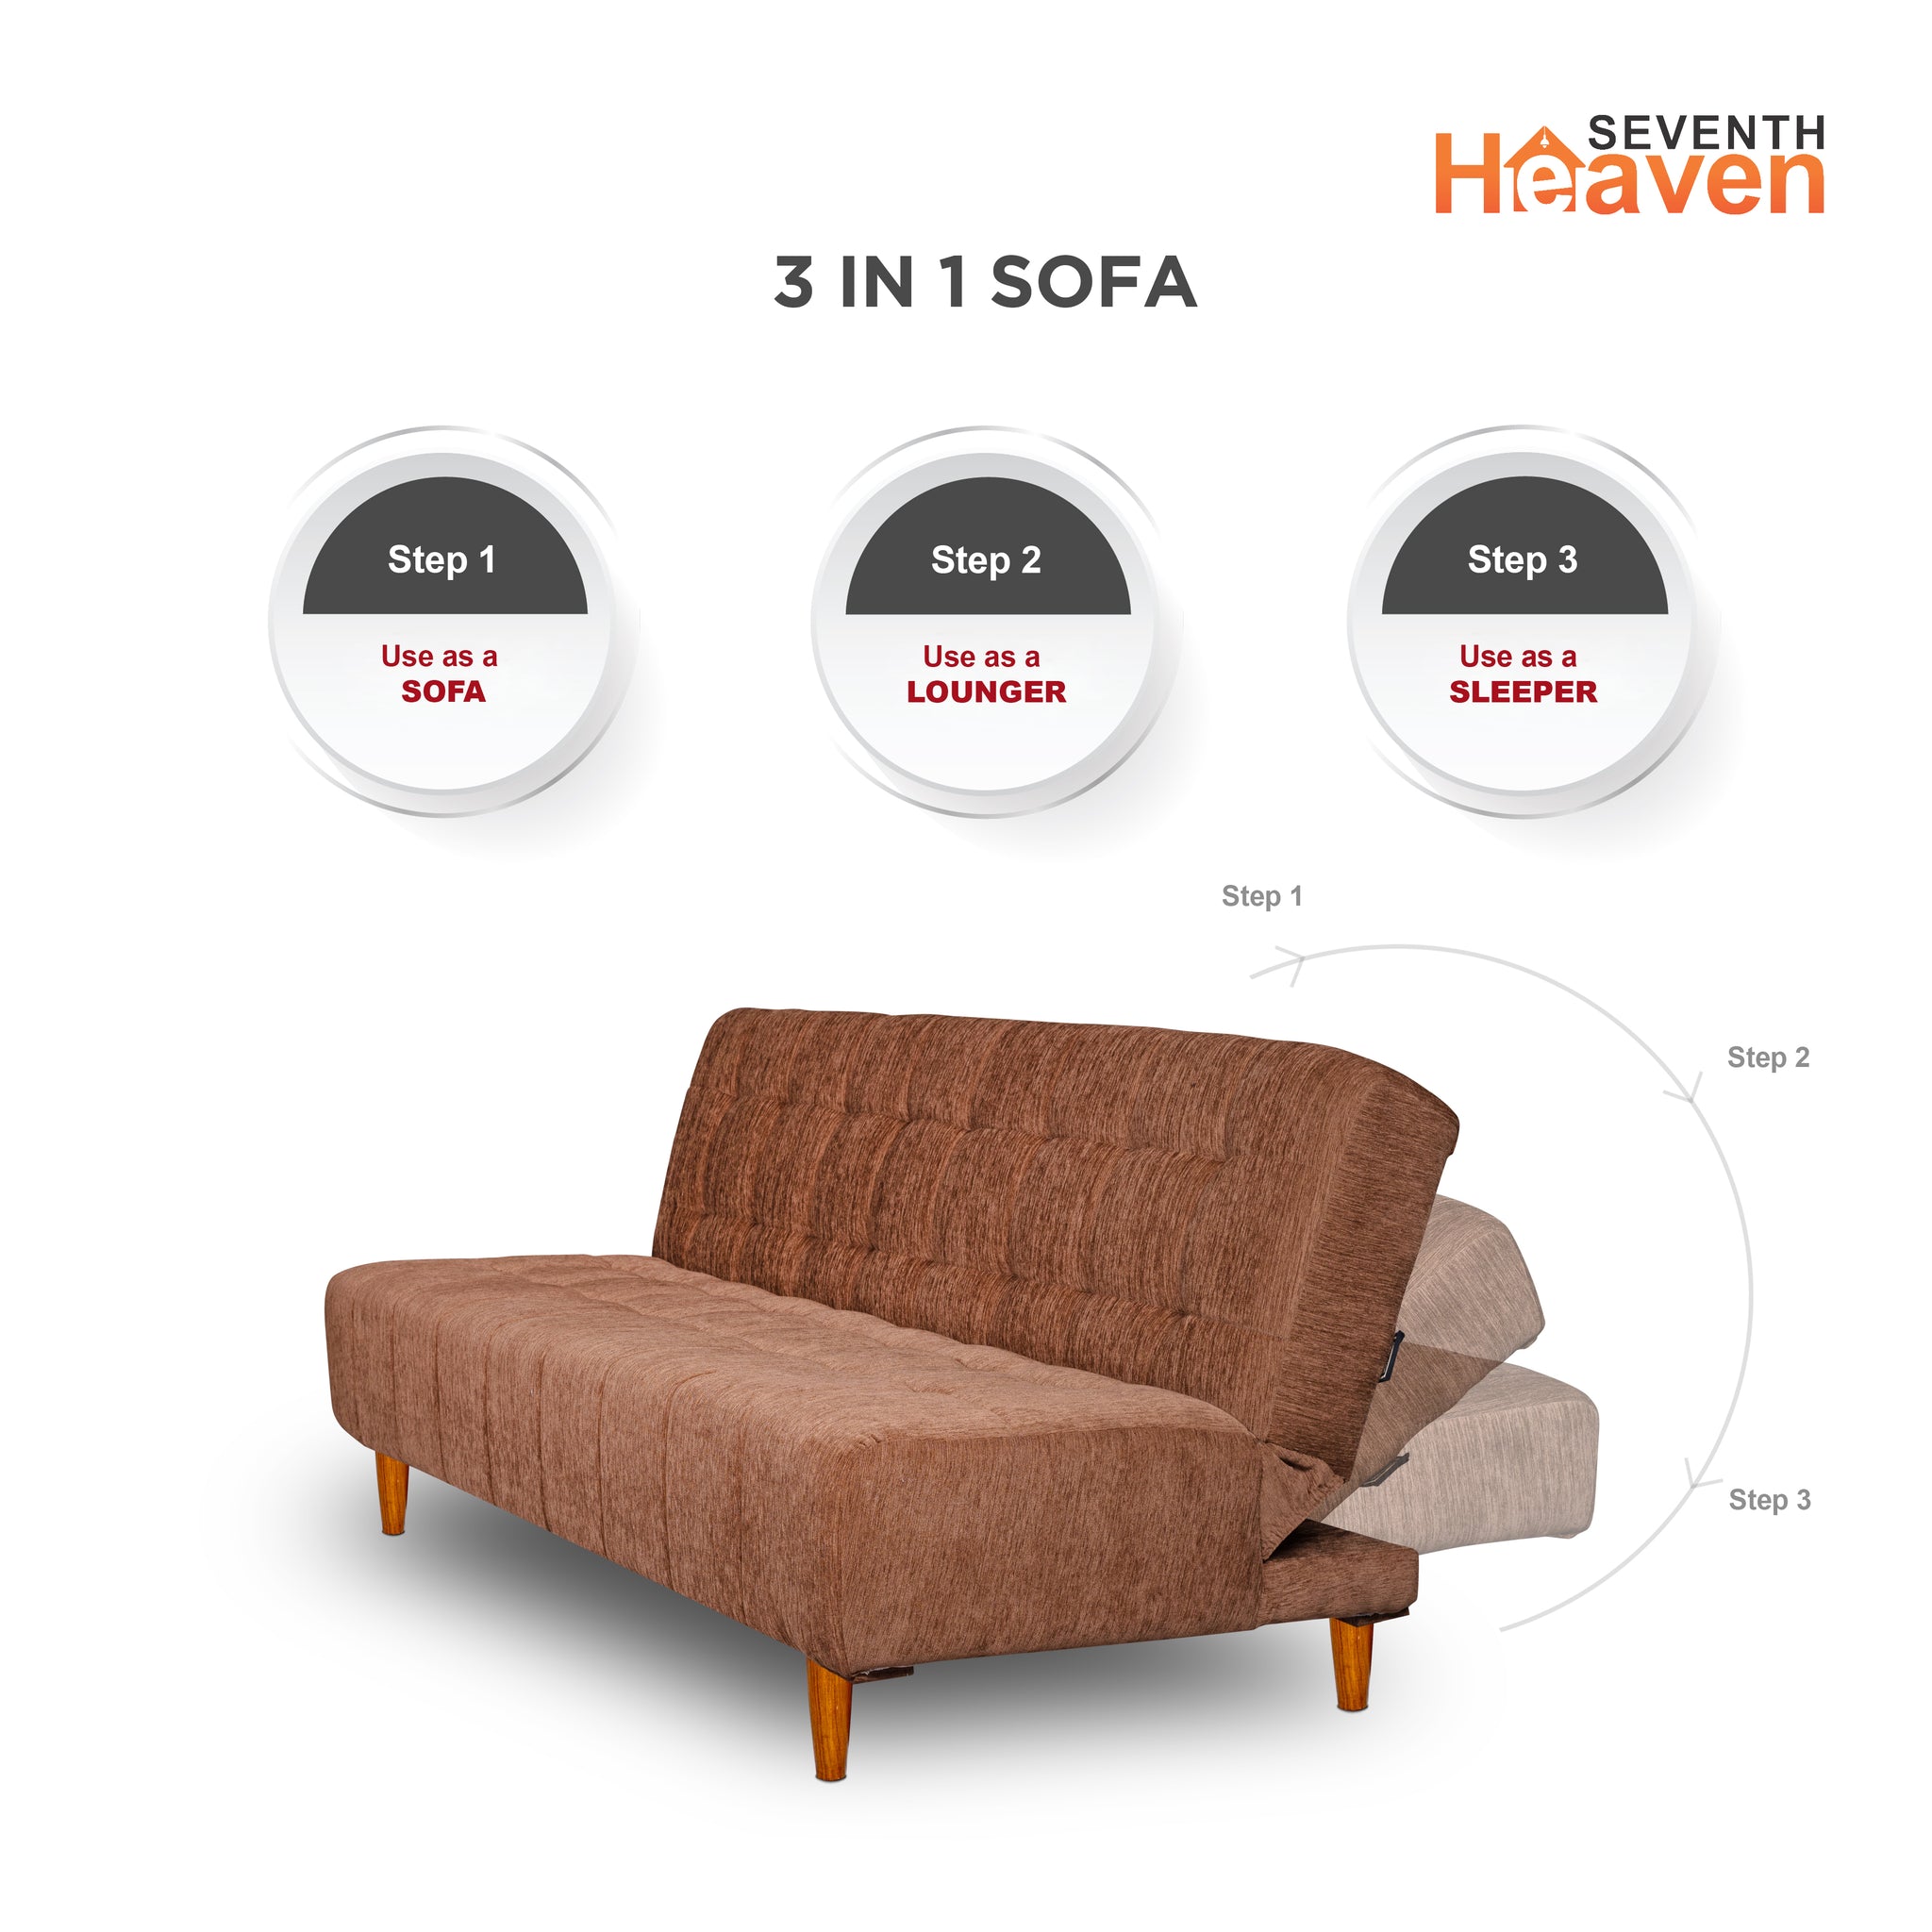 Seventh Heaven Florida 4 Seater Wooden Sofa Cum Bed. Modern & Elegant Smart Furniture Range for luxurious homes, living rooms and offices. Use as a sofa, lounger or bed. Perfect for guests. Molphino fabric with sheesham polished wooden legs. Beige colour.